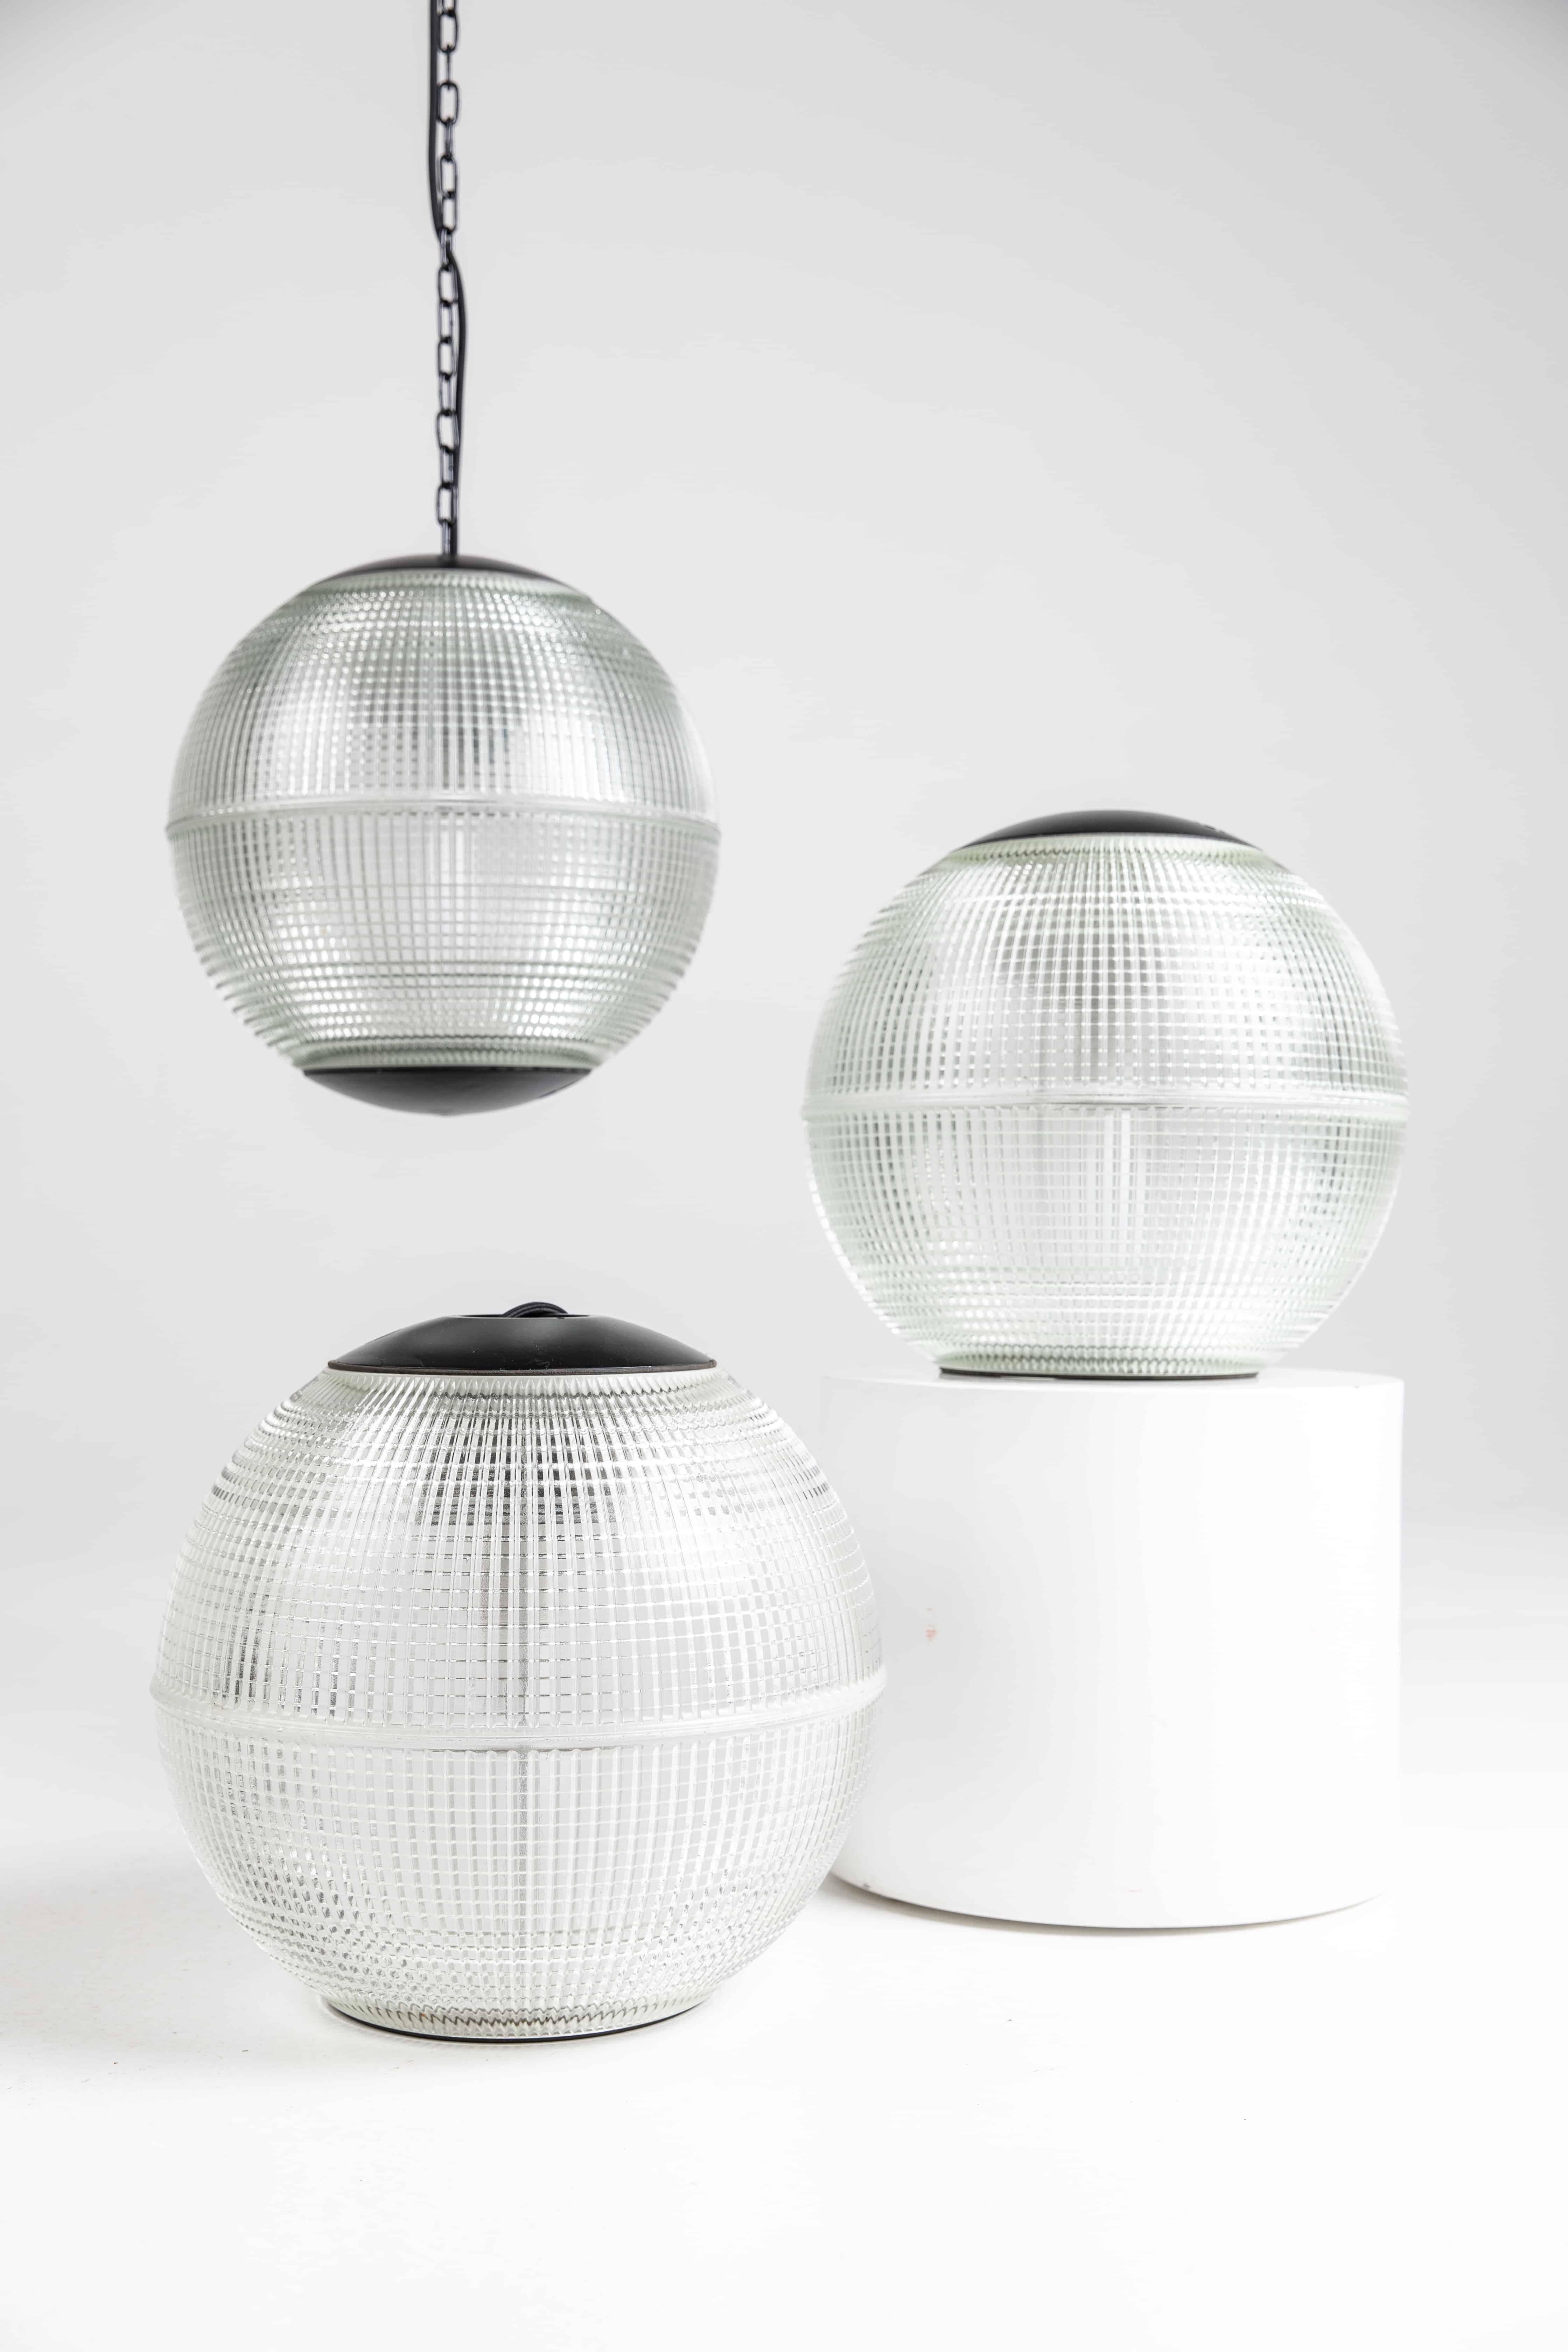 NOTE: These lights have a varying degree of cosmetic damage - mostly chips.

Please contact us if you wish to purchase.

Beautifully formed spherical Parisian glass street lights, made in France. c.1960.

This version has the 40cm diameter,